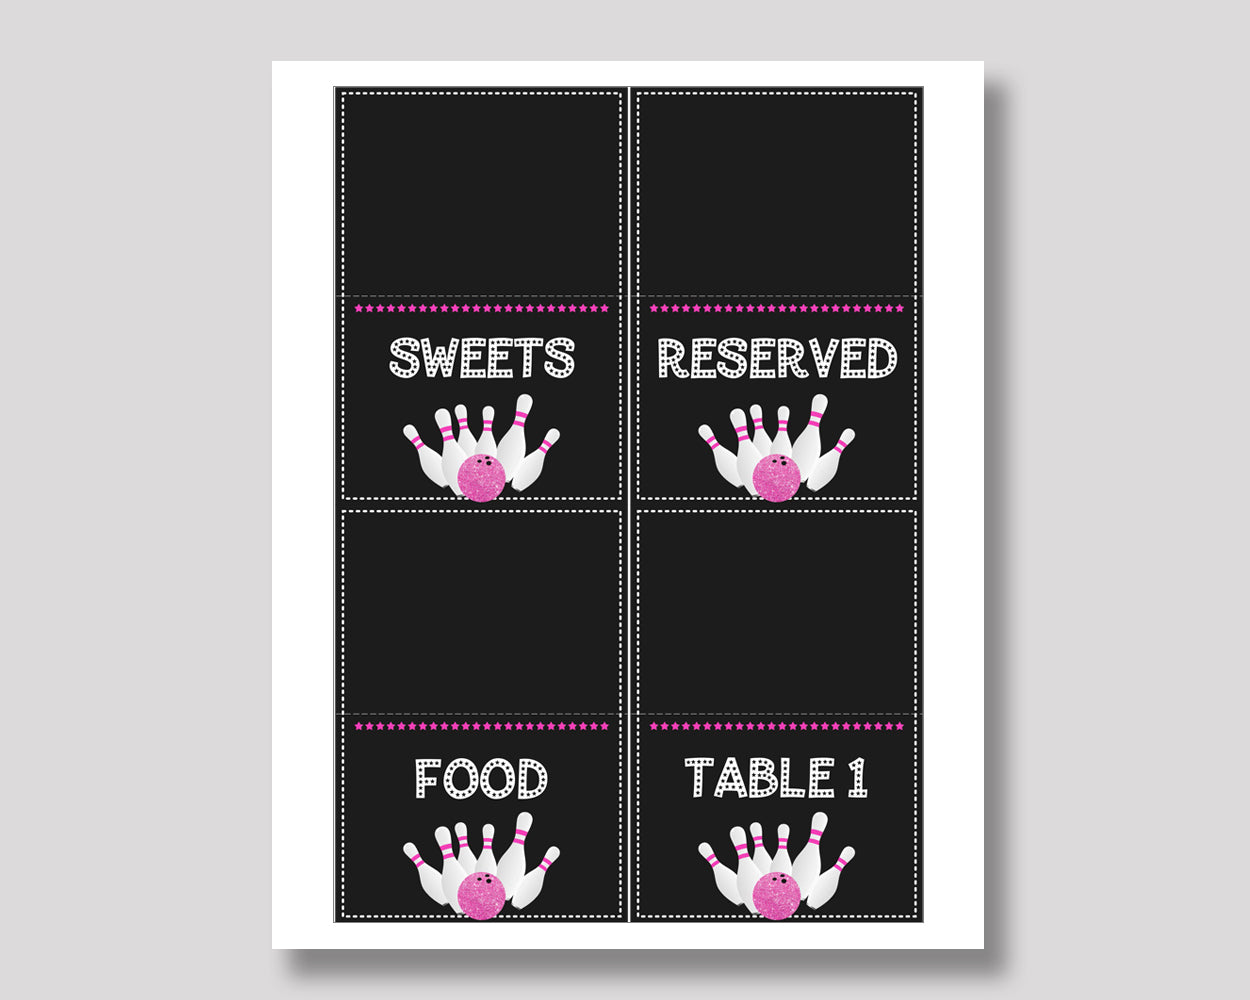 Bowling Birthday Party Food Tent, Pink Black Event Tent Cards, Bowling Food Table Labels, Party Foldable Food Tent Girl, WYP5V